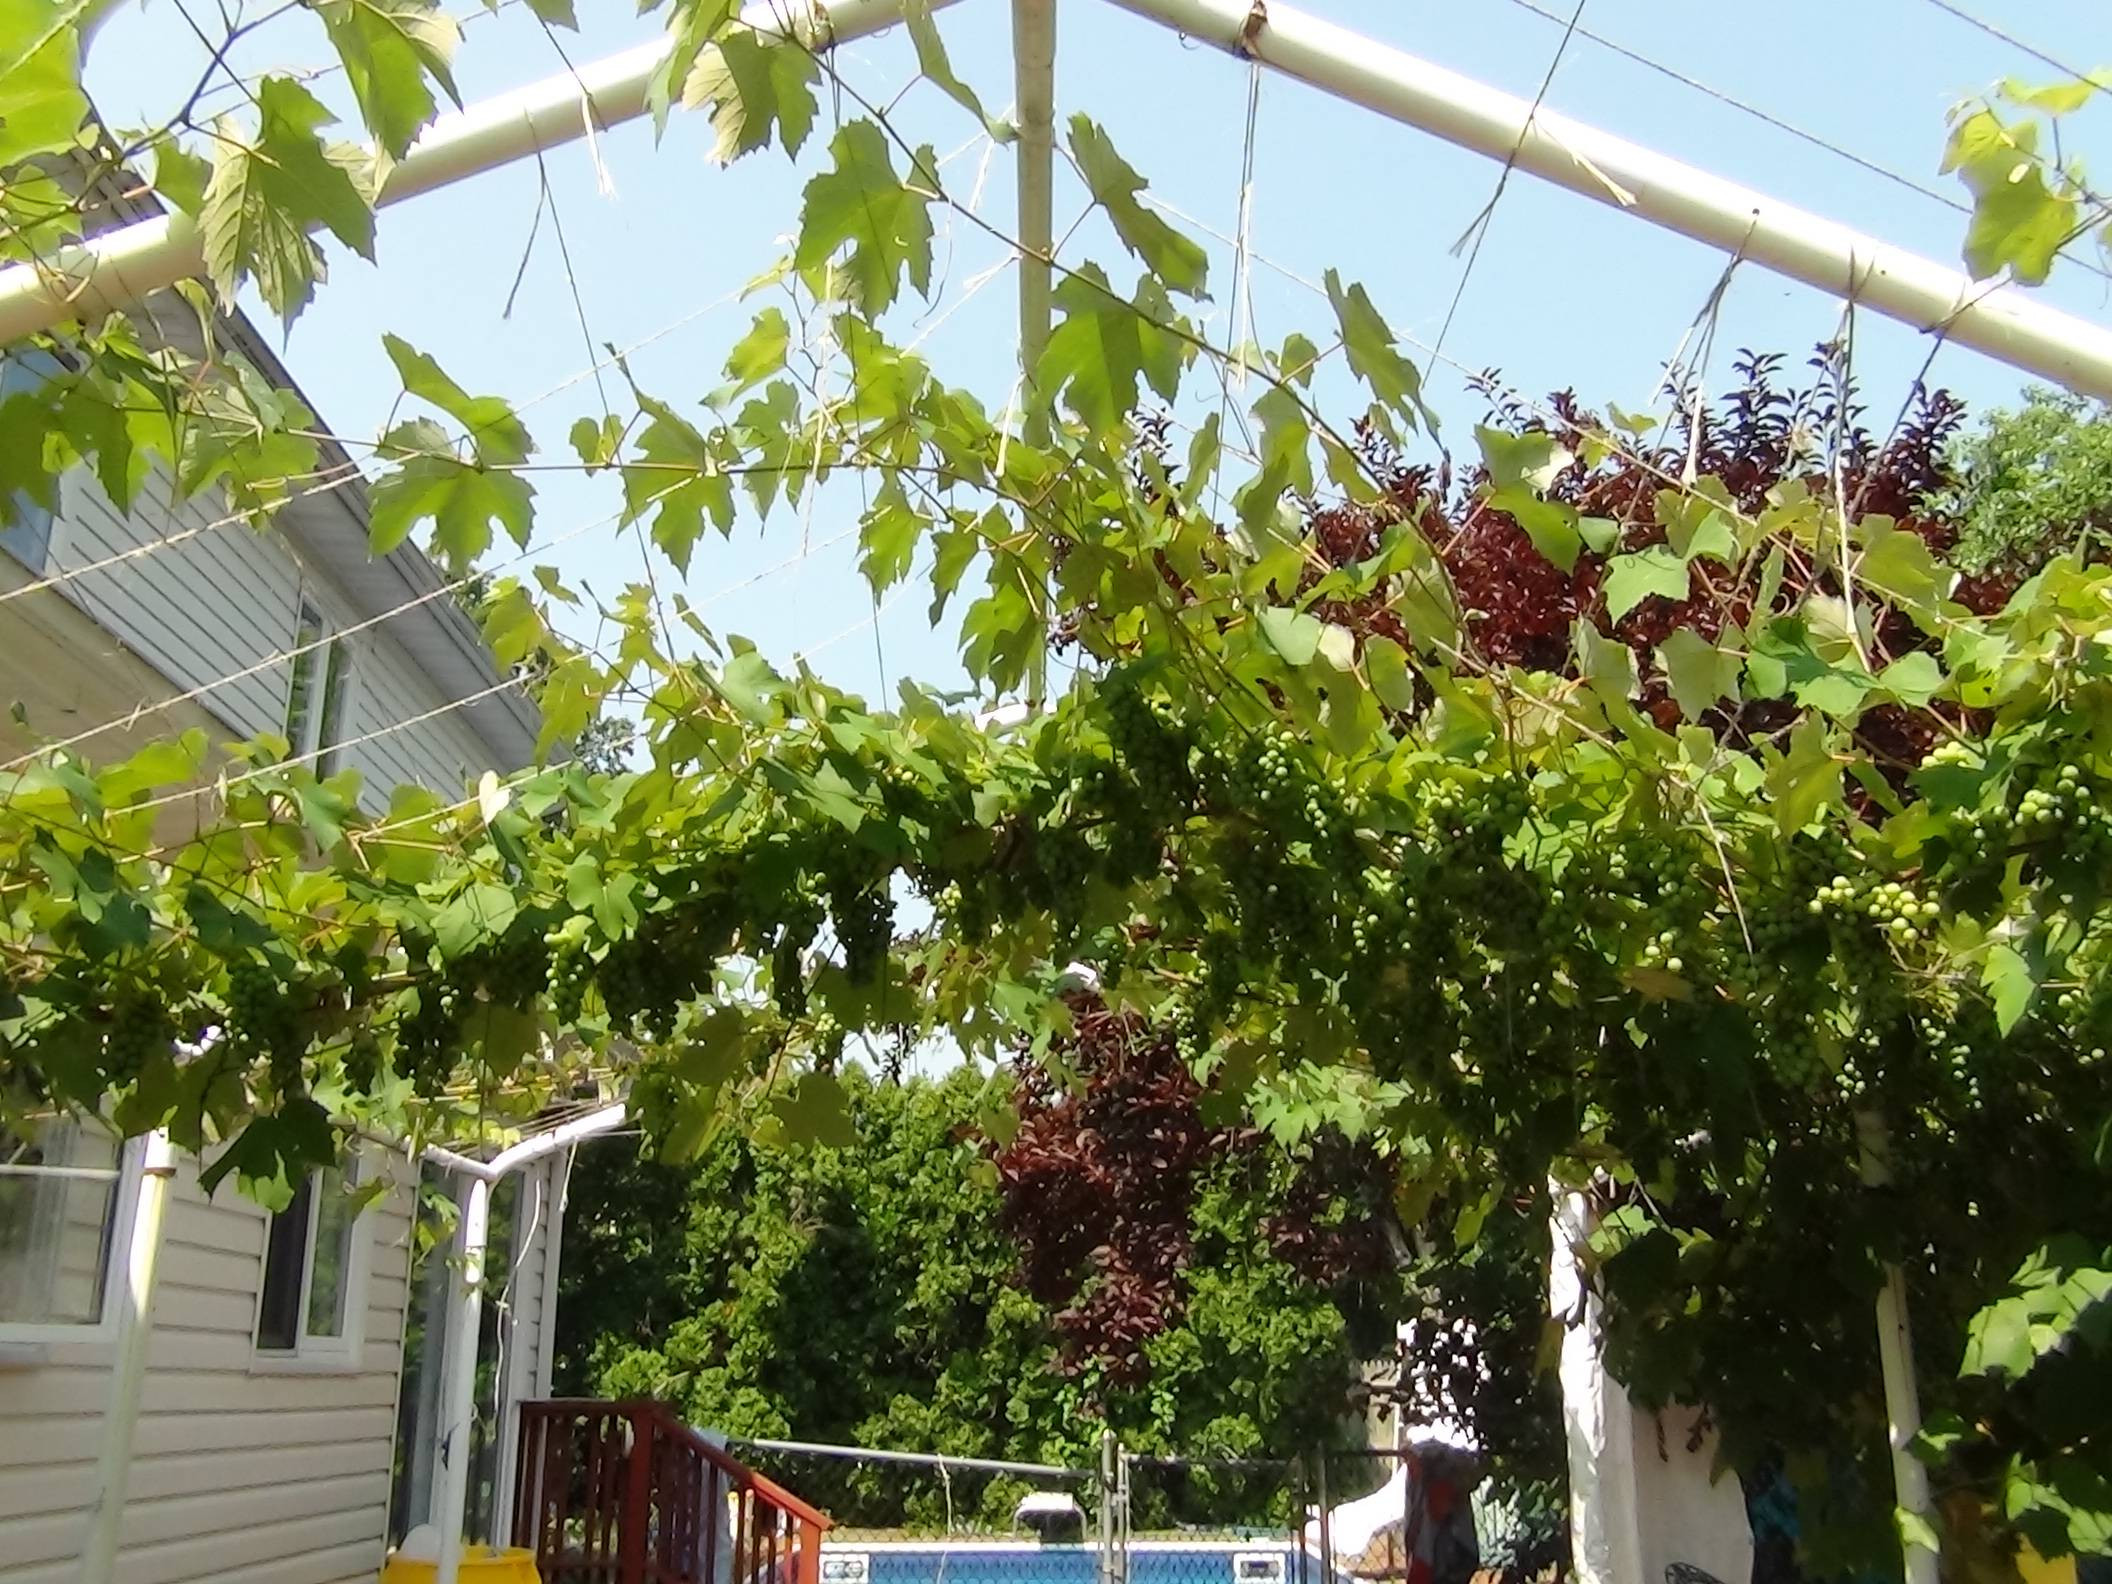 Growing Grapes In Backyard
 My mom has been growing grapes in our backyard She